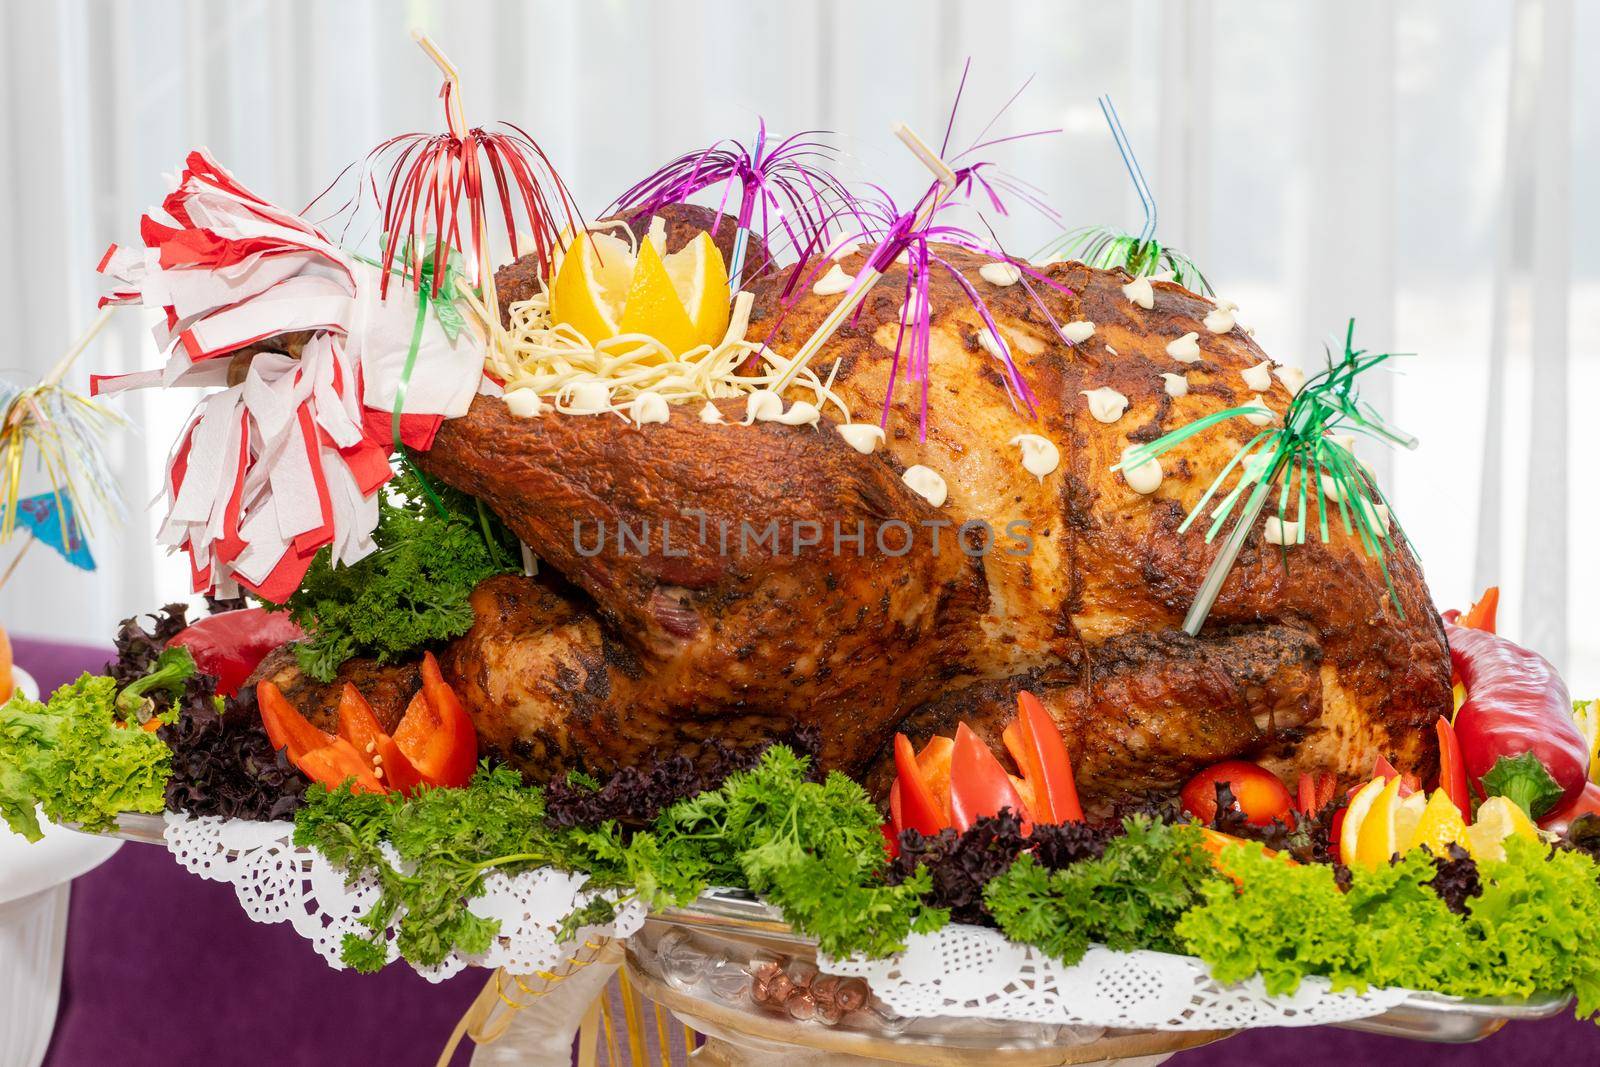 A large roast turkey on the holiday table at Thanksgiving. by Serhii_Voroshchuk